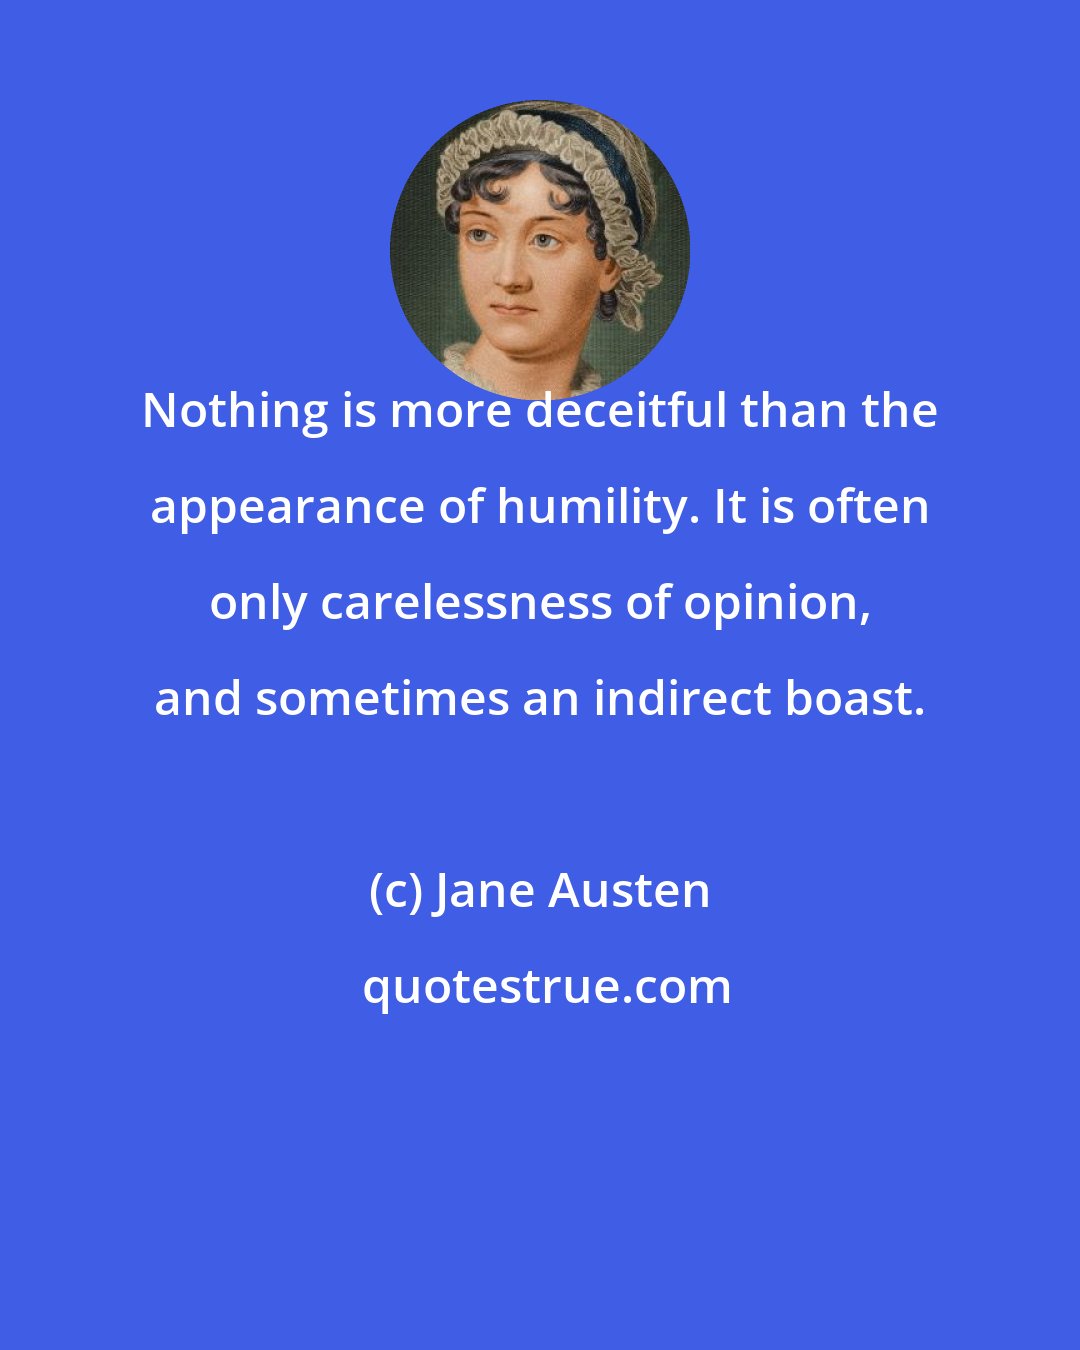 Jane Austen: Nothing is more deceitful than the appearance of humility. It is often only carelessness of opinion, and sometimes an indirect boast.